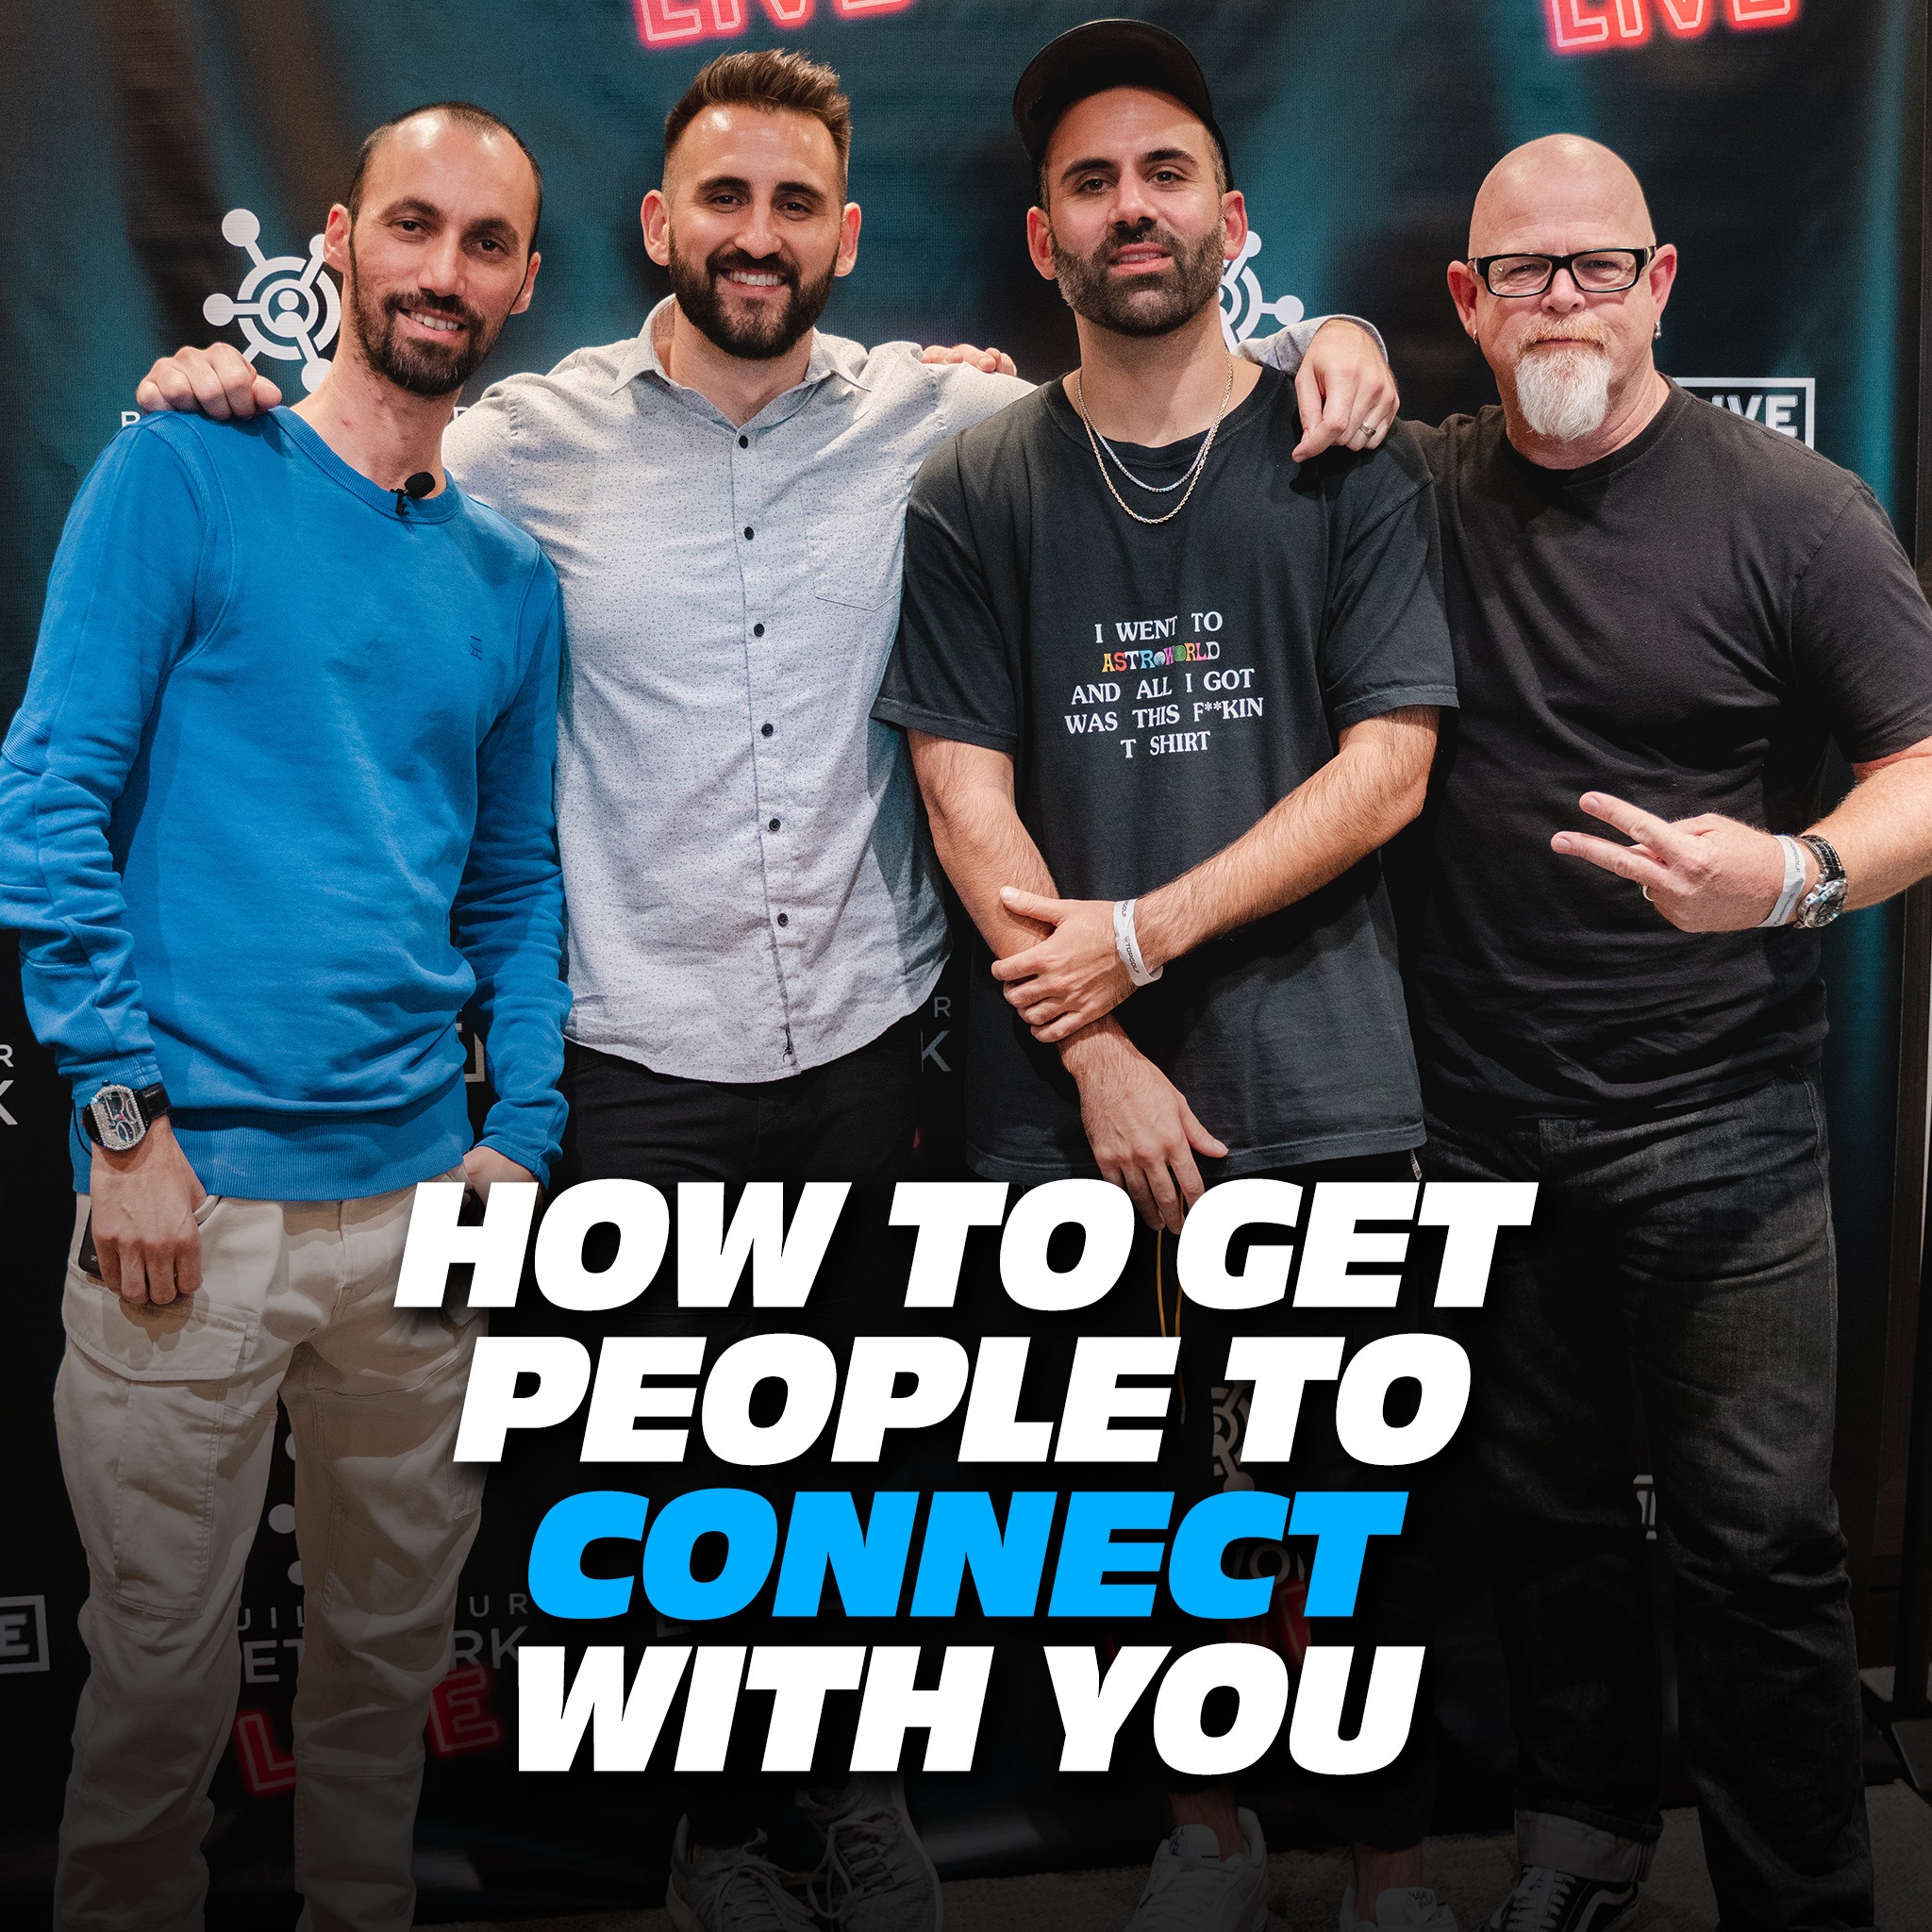 How to Get People to Connect with YOU